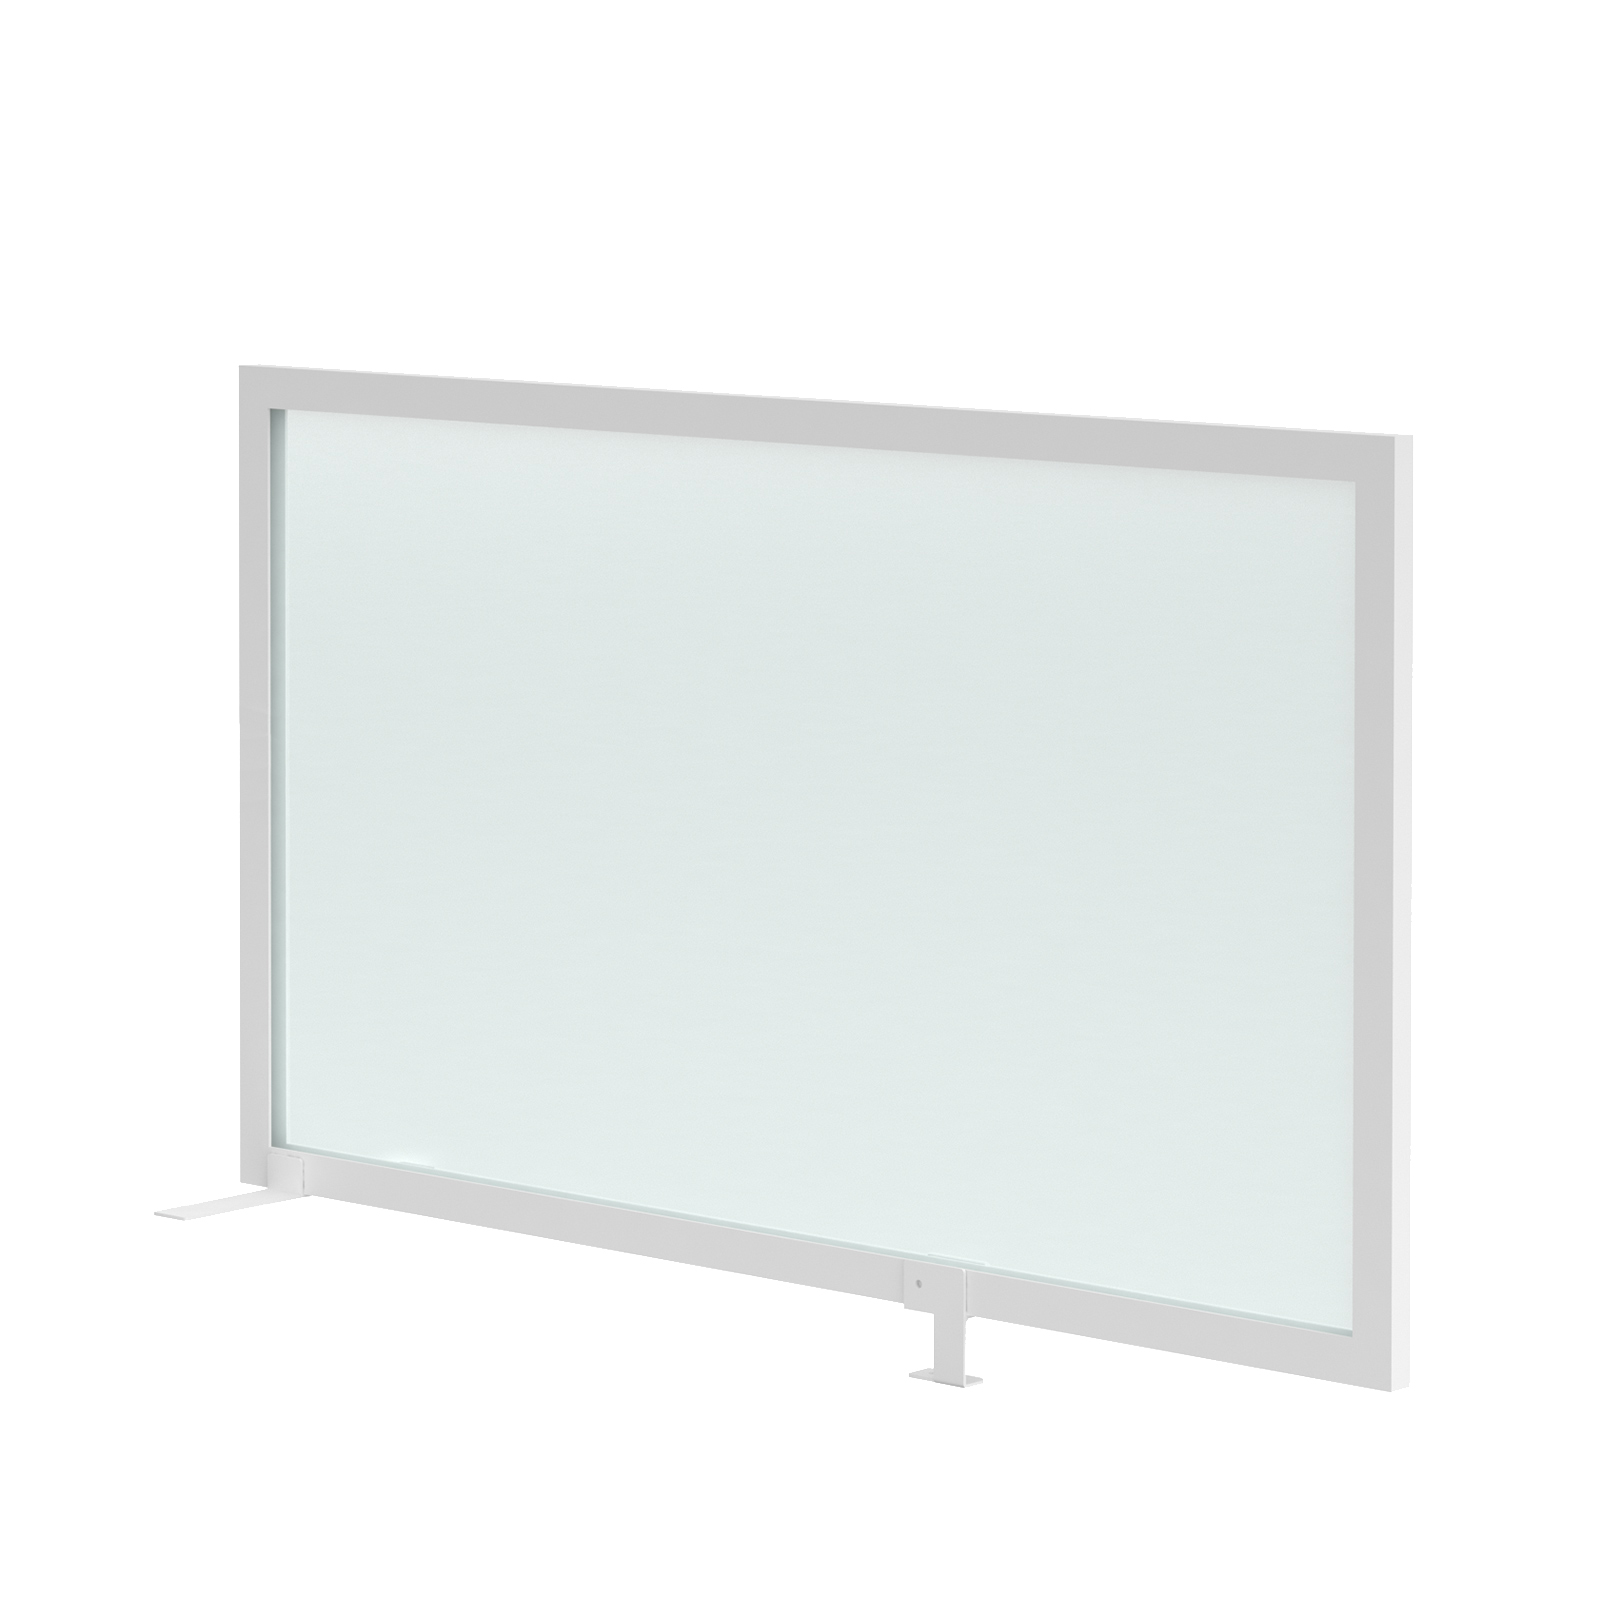 Clear polyvinyl desk mounted high return screen 1200mm with bracket